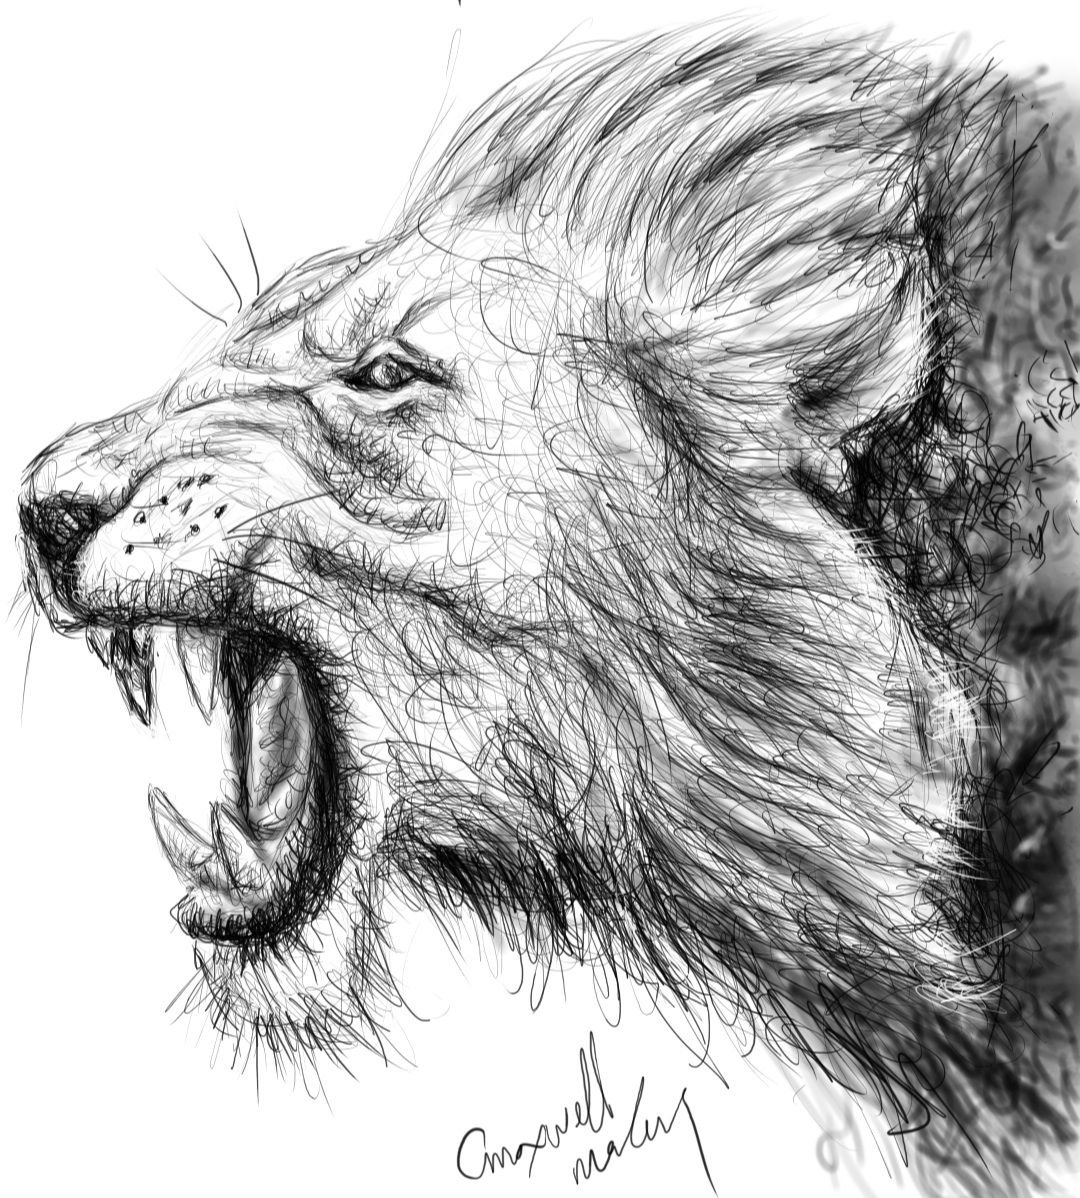 Graphite Pencil Drawing  Lion by fungidesignz on DeviantArt